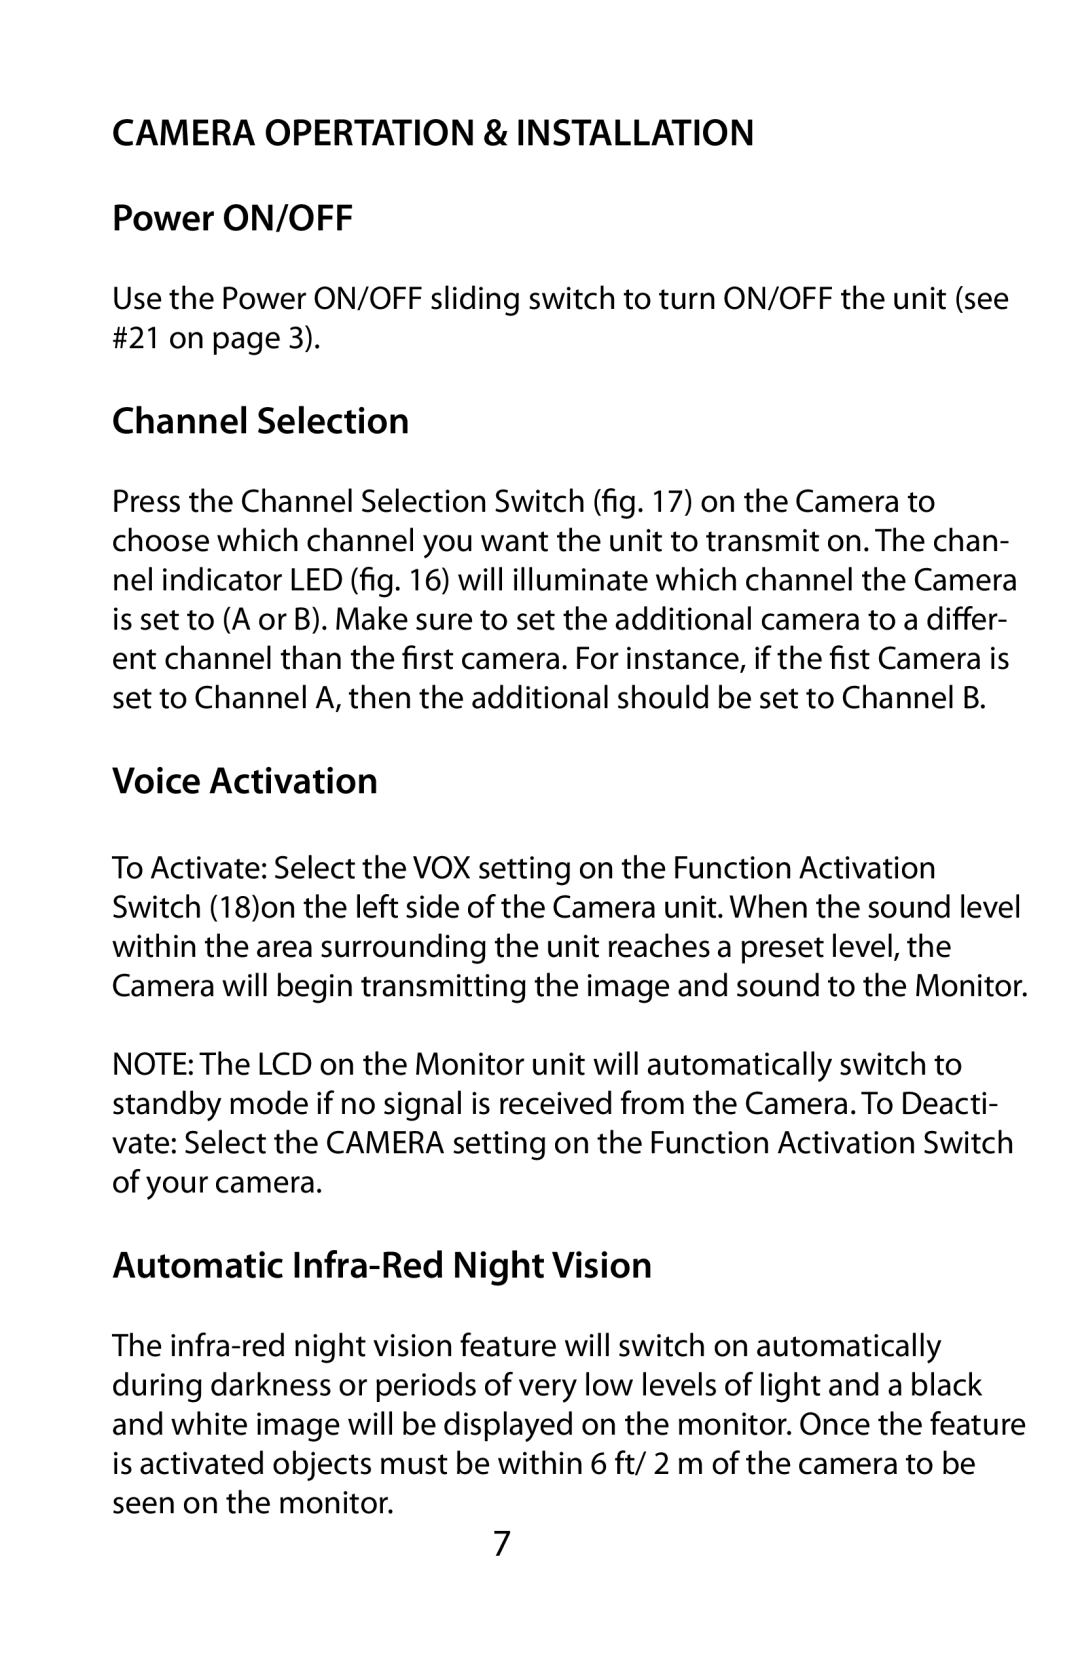 Mobi Technologies 70061 user manual CAMERA OPERTATION & INSTALLATION Power ON/OFF, Channel Selection, Voice Activation 